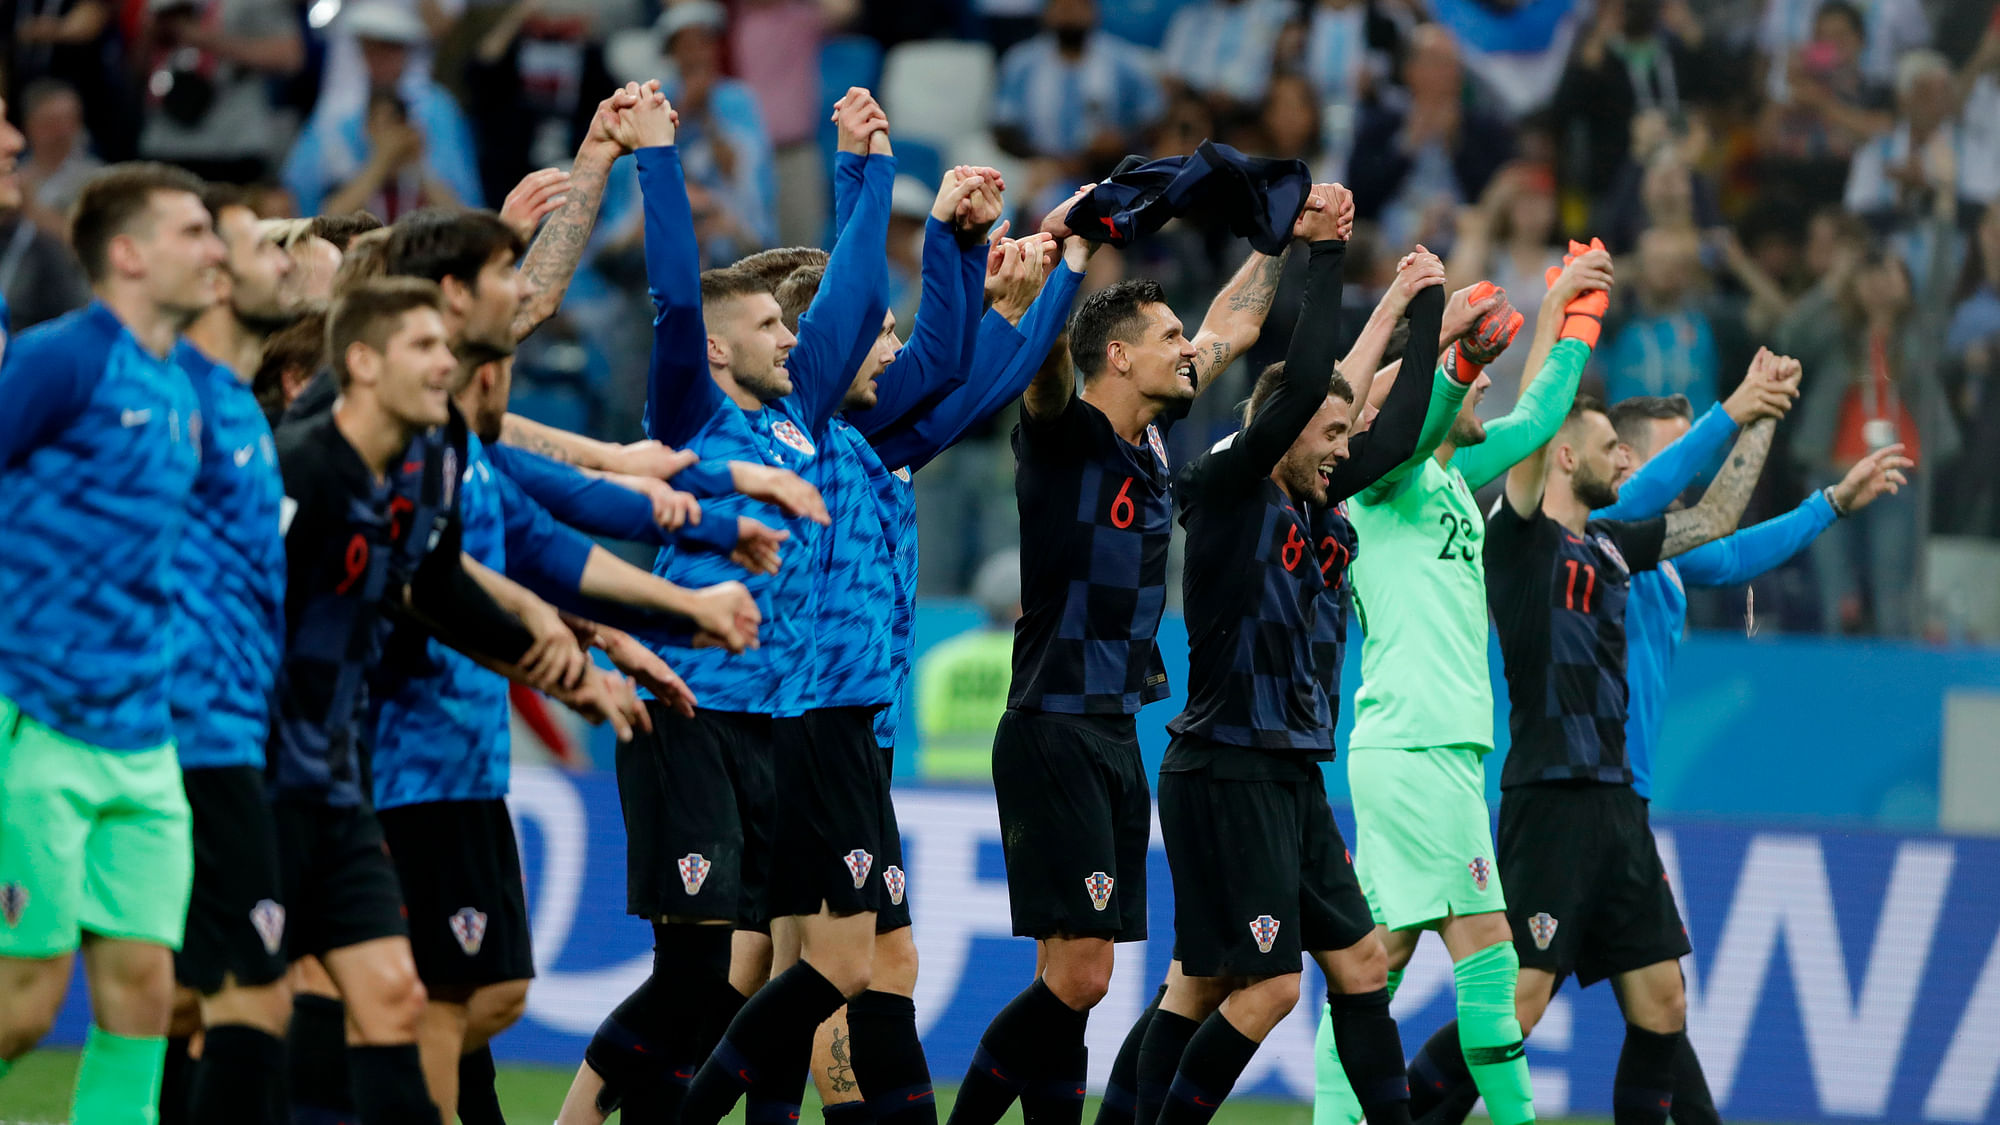 Croatia players celebrate at the end of the group D match between Argentina and Croatia at the 2018 soccer World Cup in Nizhny Novgorod Stadium in Nizhny Novgorod, Russia, Thursday, June 21, 2018. Croatia defeated Argentina 3-0.